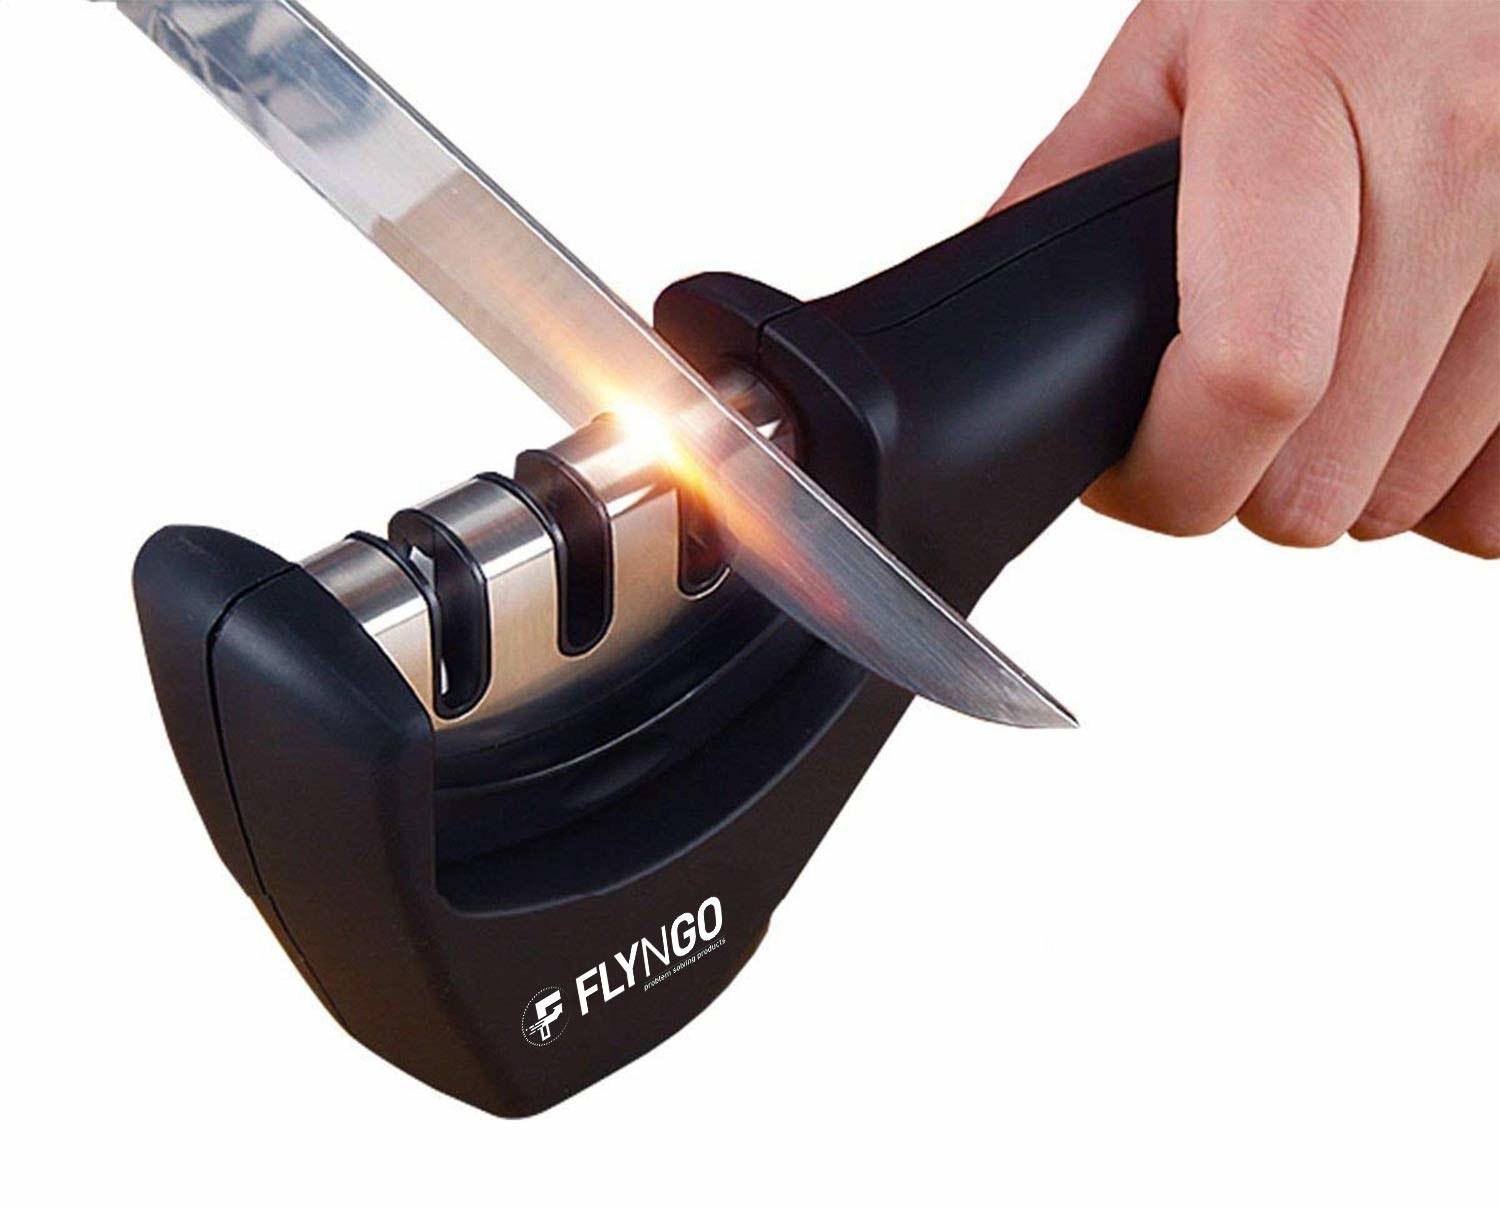 A person sharpening a knife using a sharpener